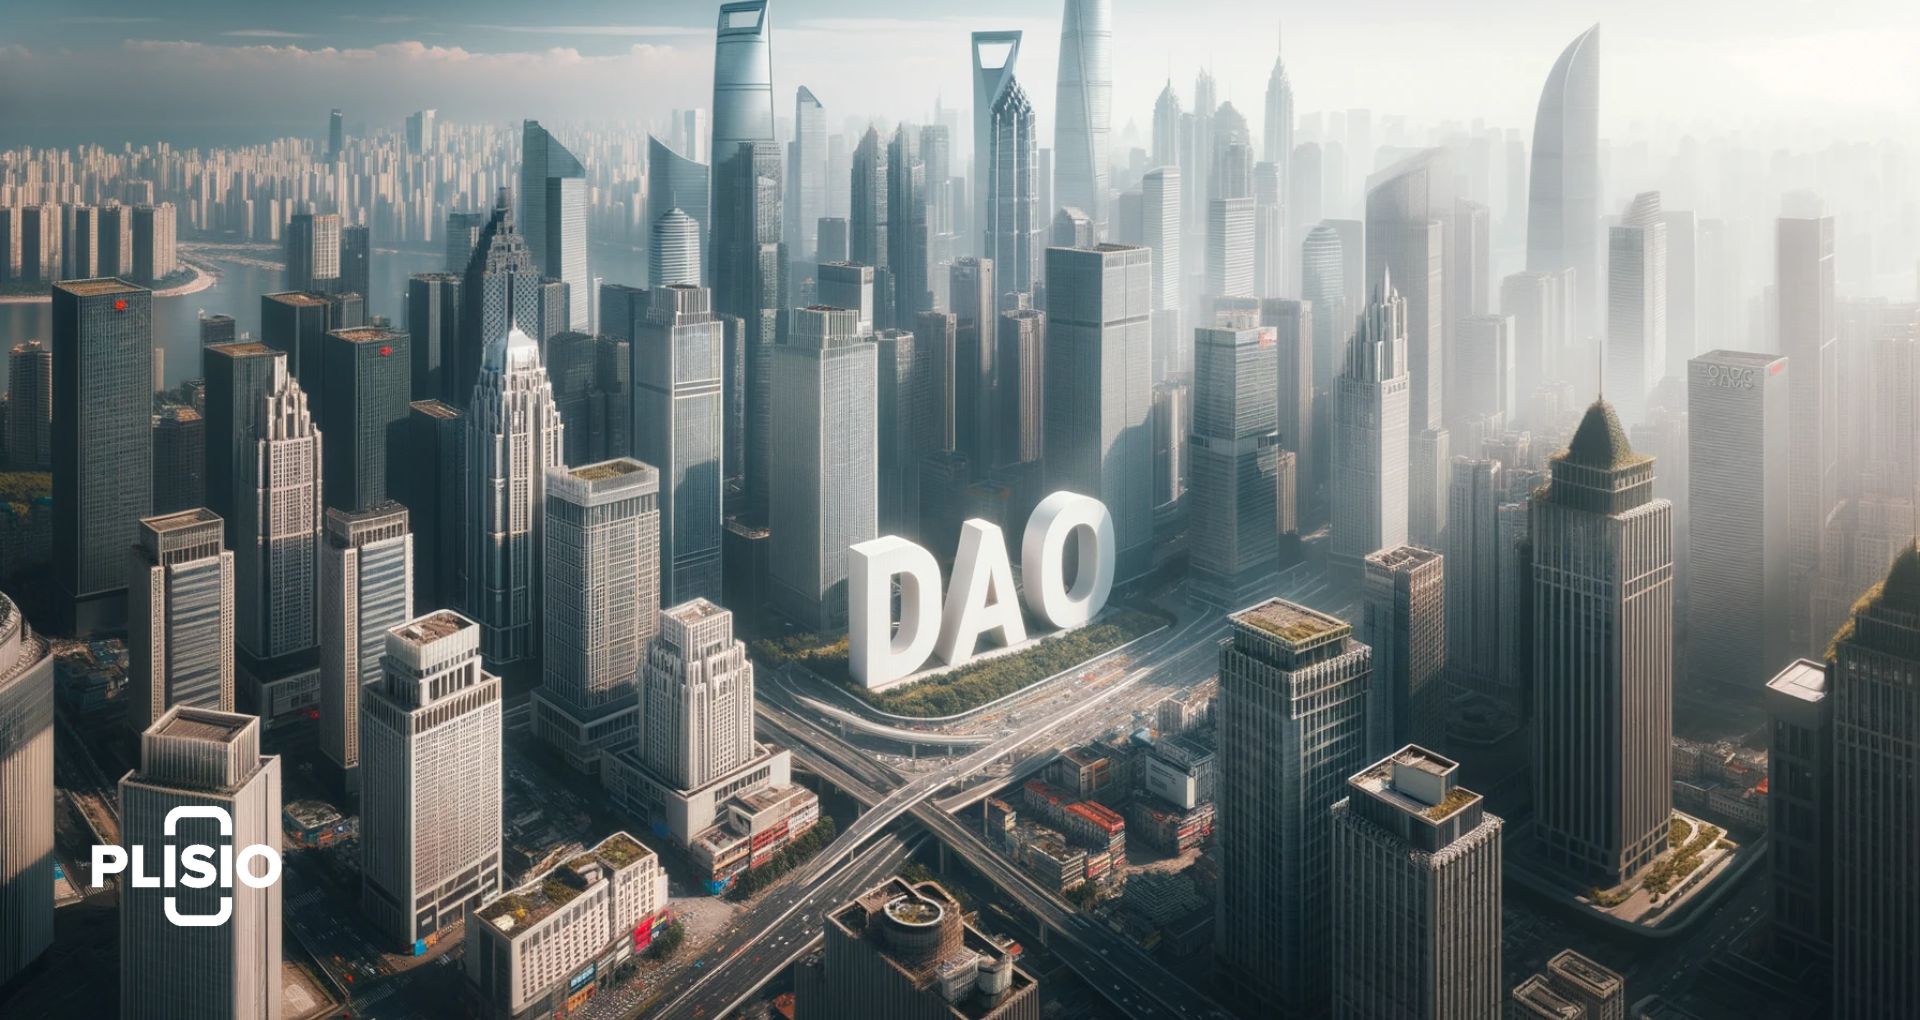 What Is a DAO?